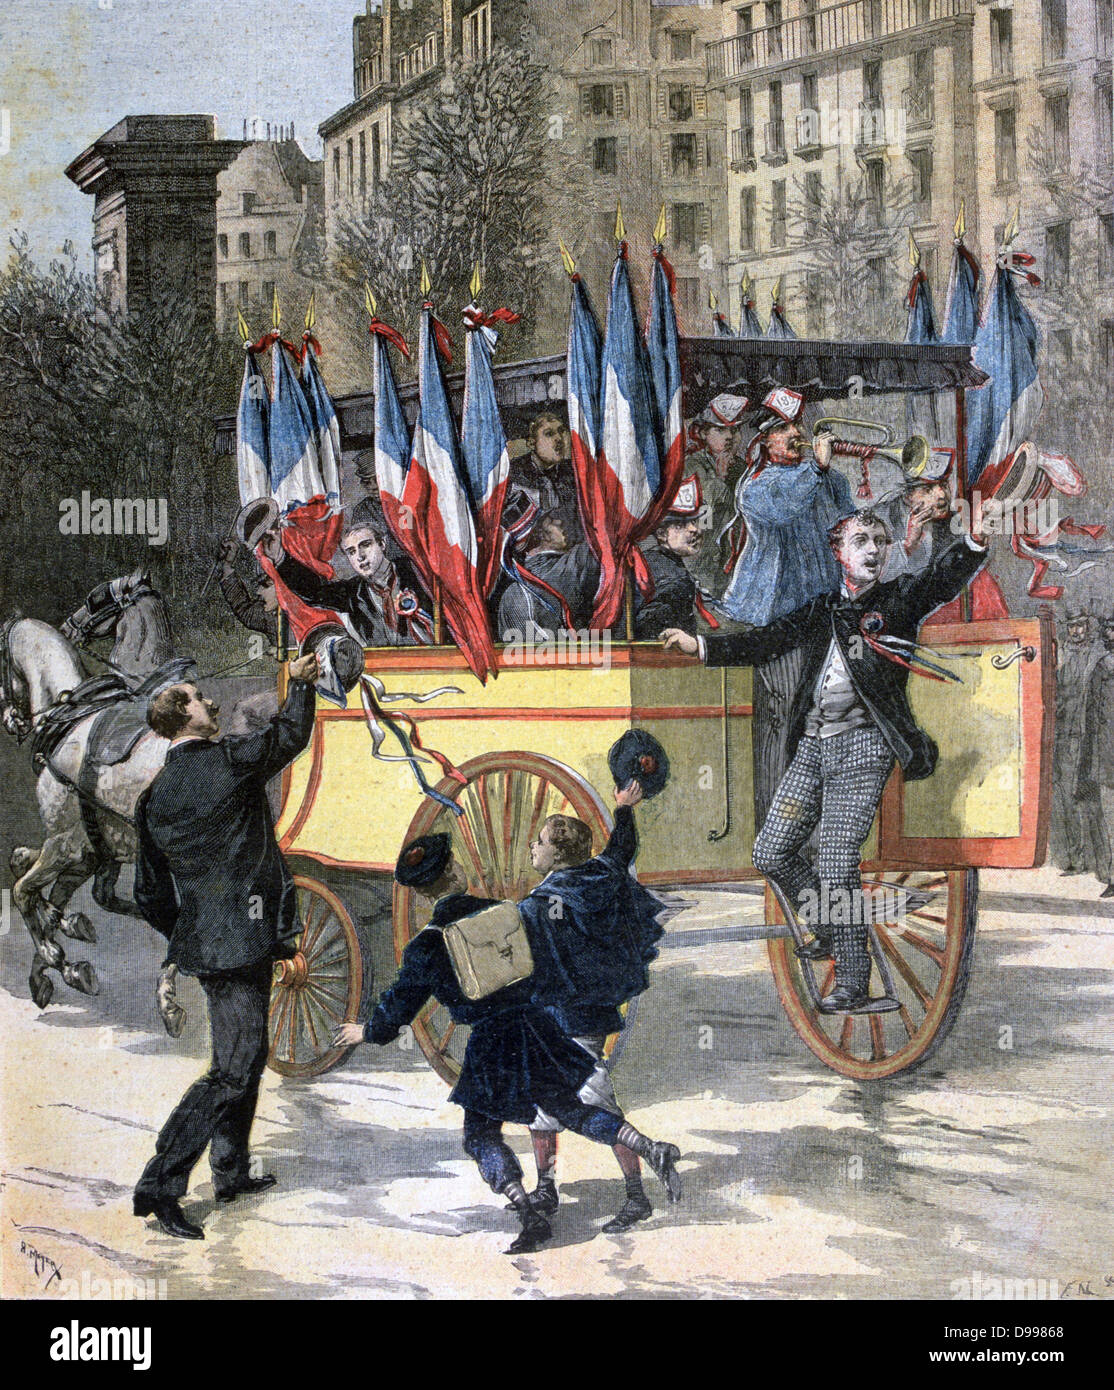 French army conscripts setting out for training. In 1892 10% less young men eligible for conscriptions than usual, perhaps due to the Franco-Prussian War twenty years earlier. 'Le Petit Journal', Paris, 5 March 1892.  France Military Stock Photo